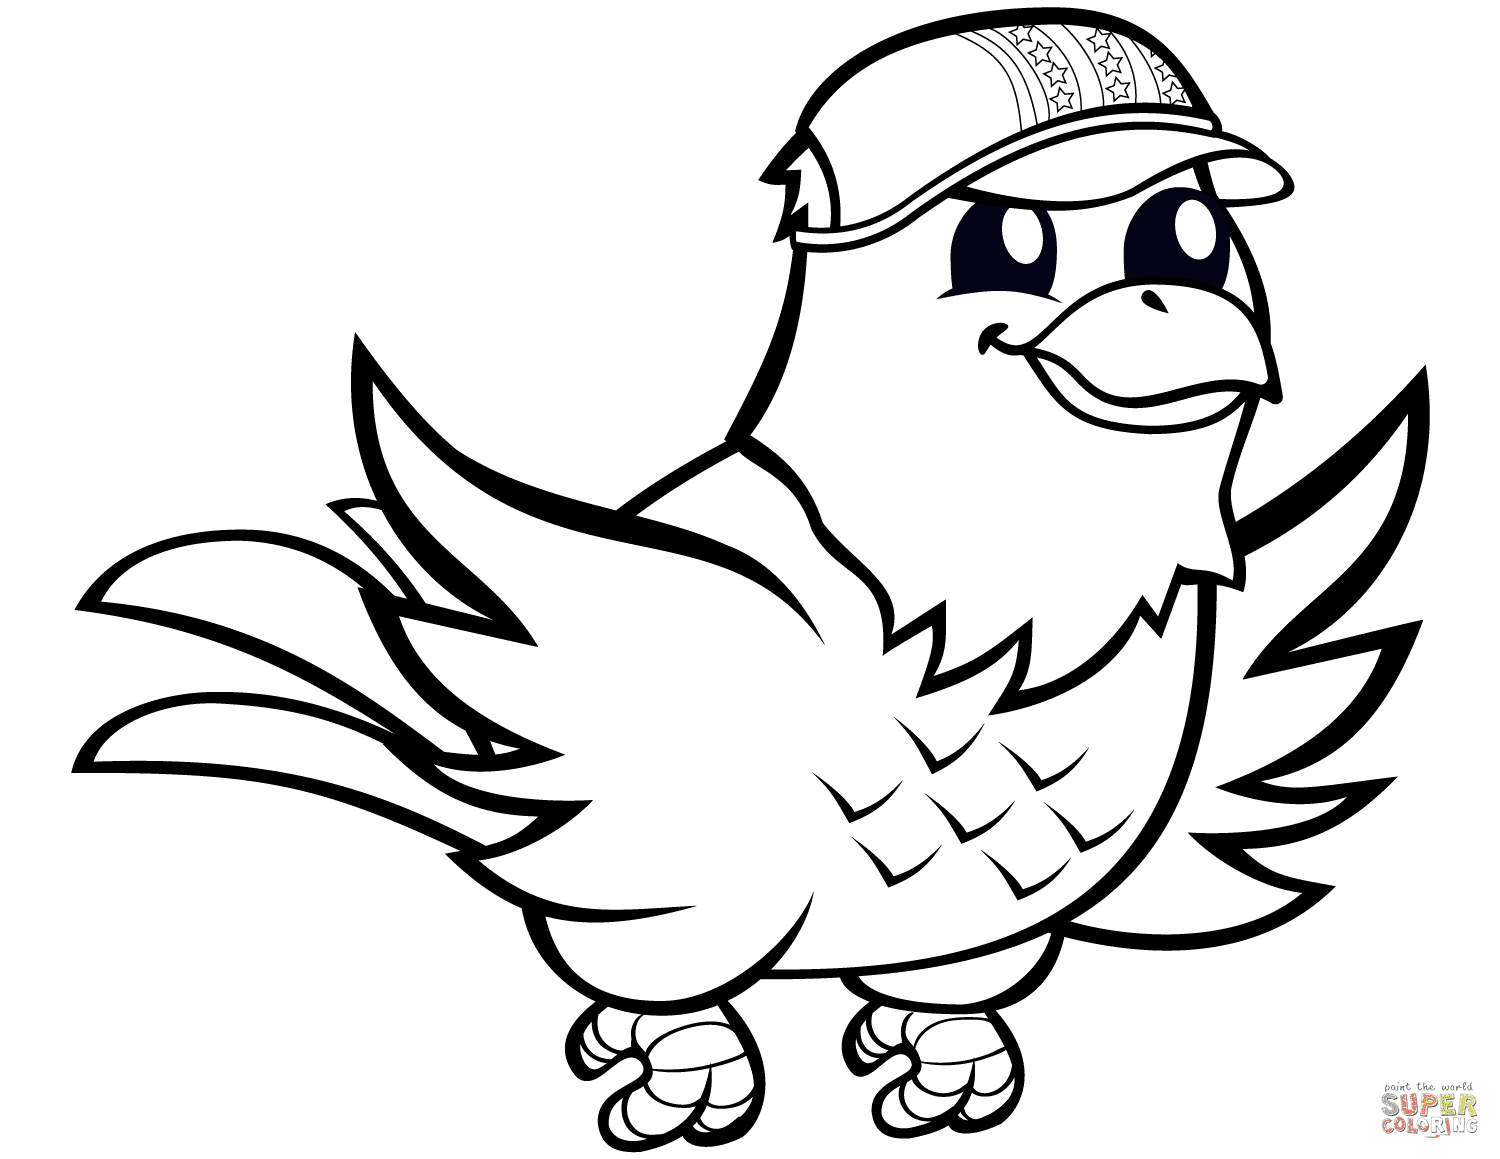 Funny Eagle with Baseball Cap Coloring Page